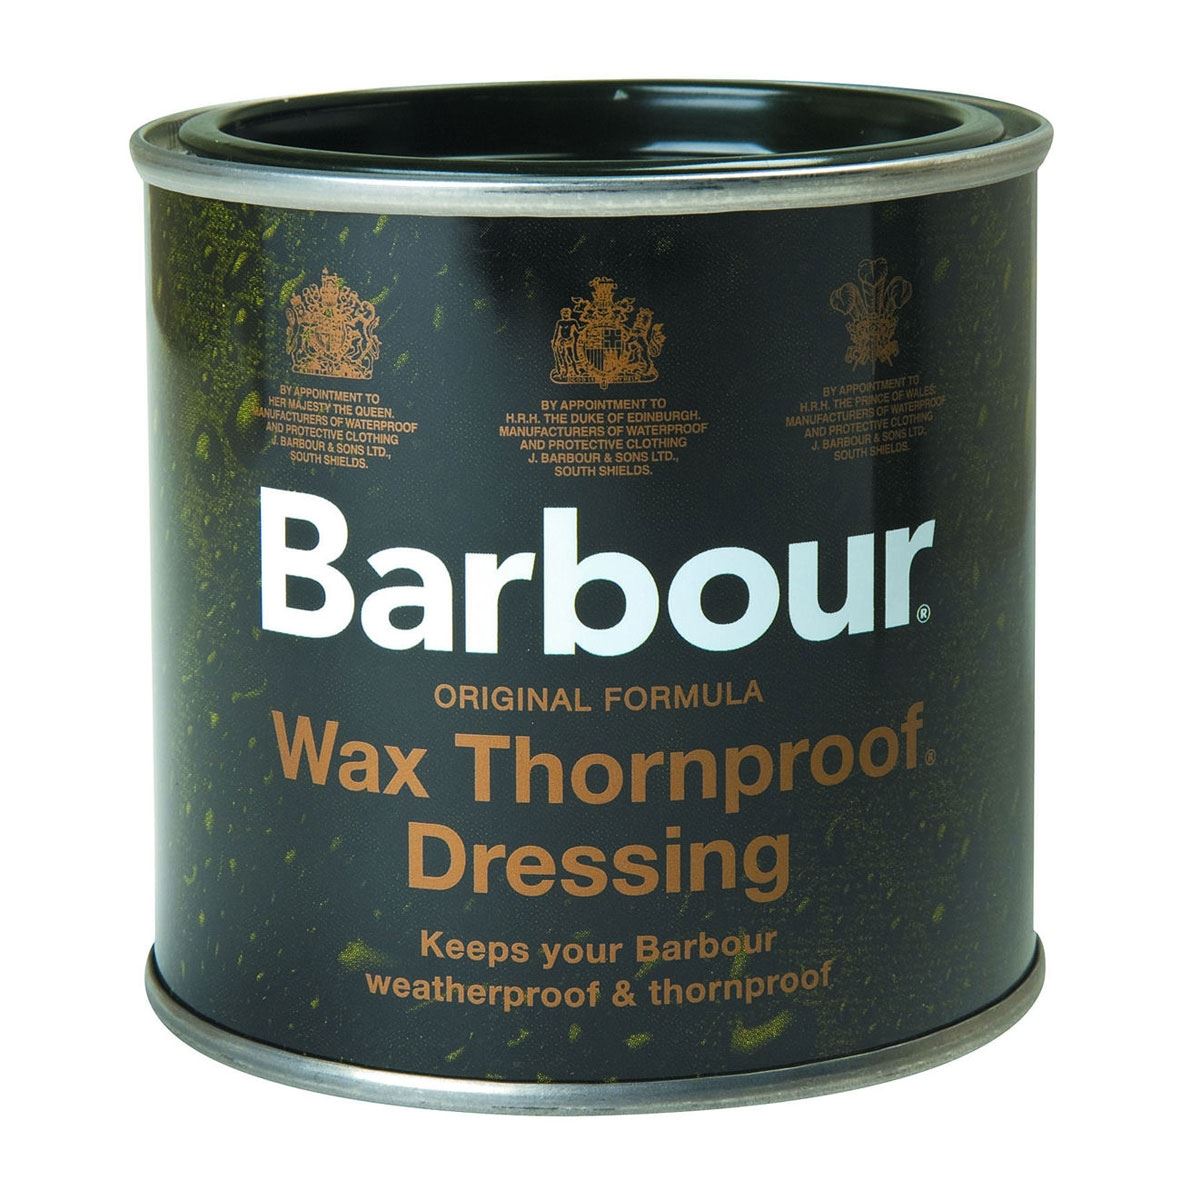 In what way does Barbour Wax prolong the life of a wax jacket?